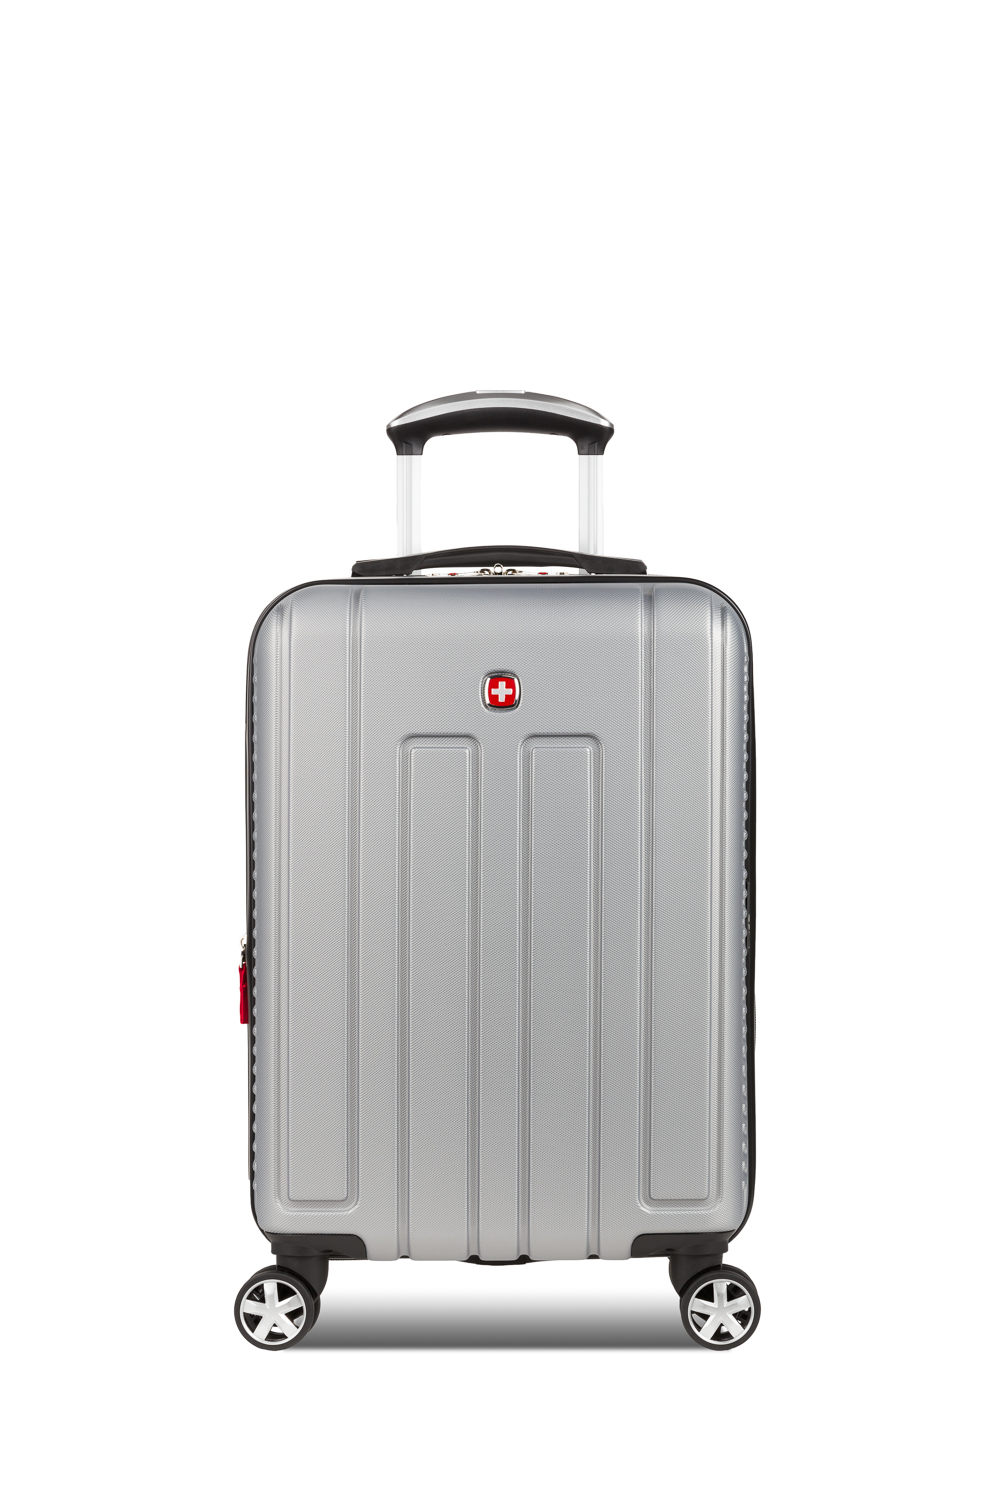 Luggage store: Buy trolley bags, suitcases & luggage bags online